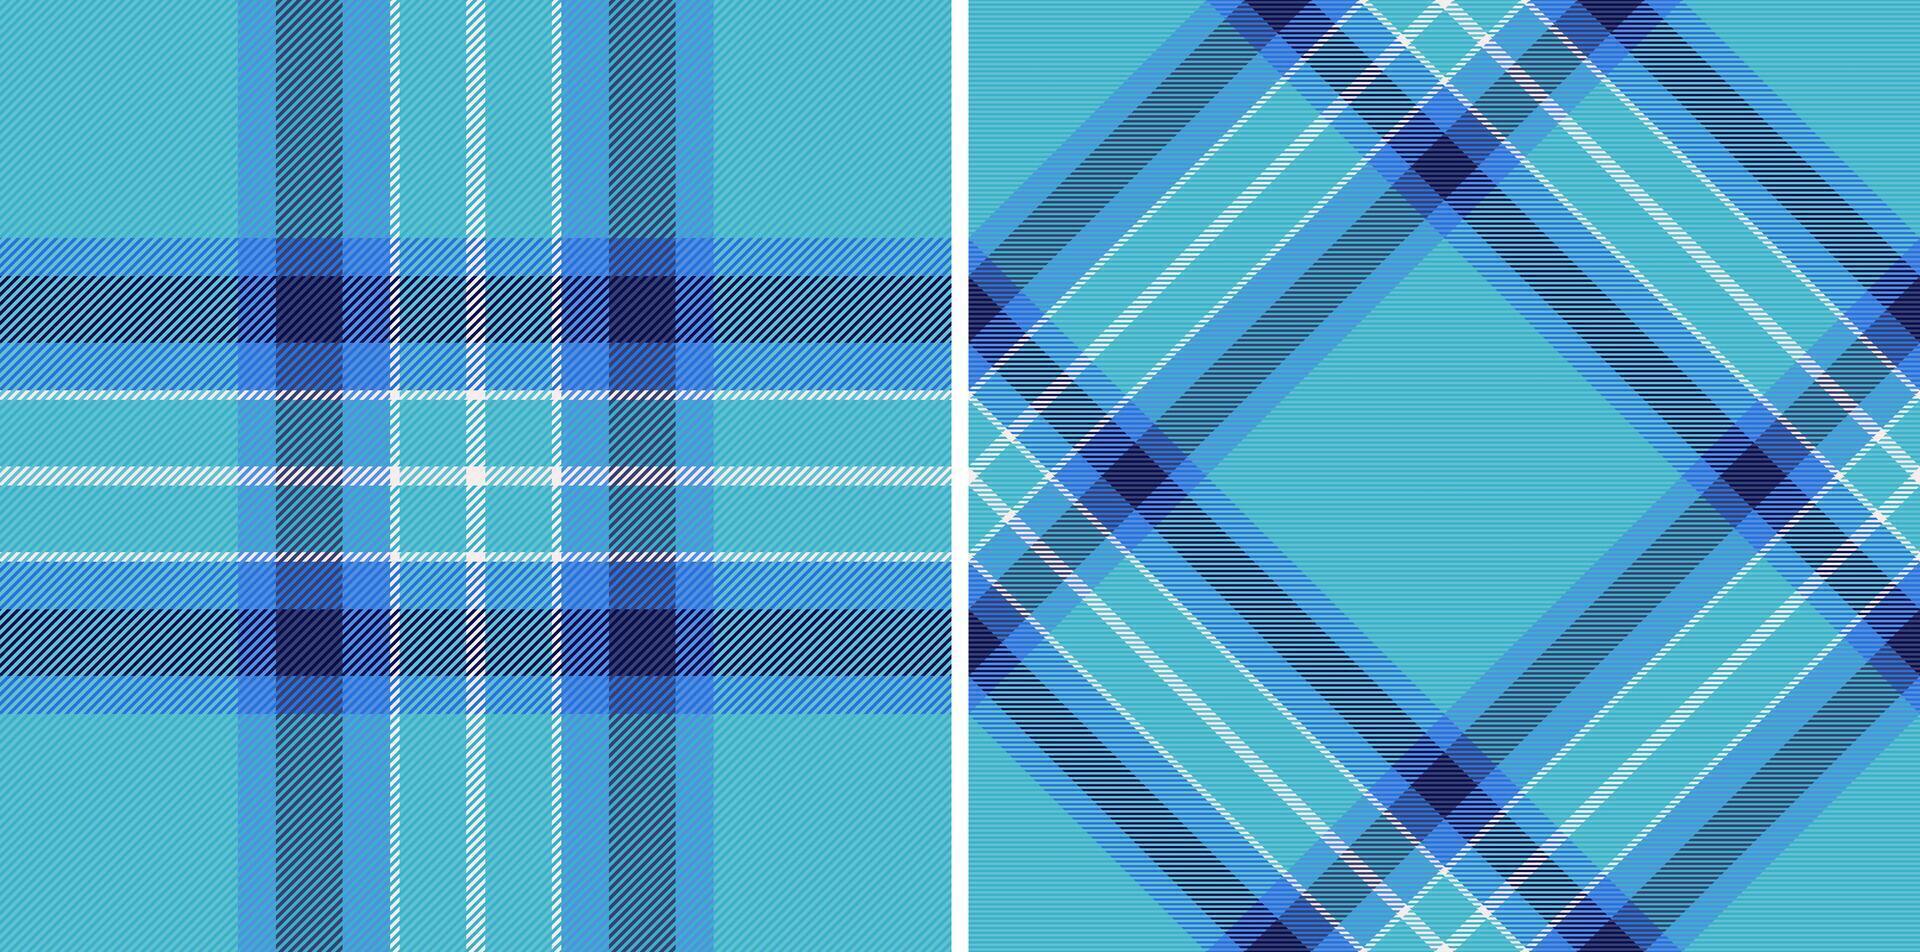 Check texture vector of tartan plaid fabric with a pattern textile background seamless. Set in gradient colors for geometric design patterns.